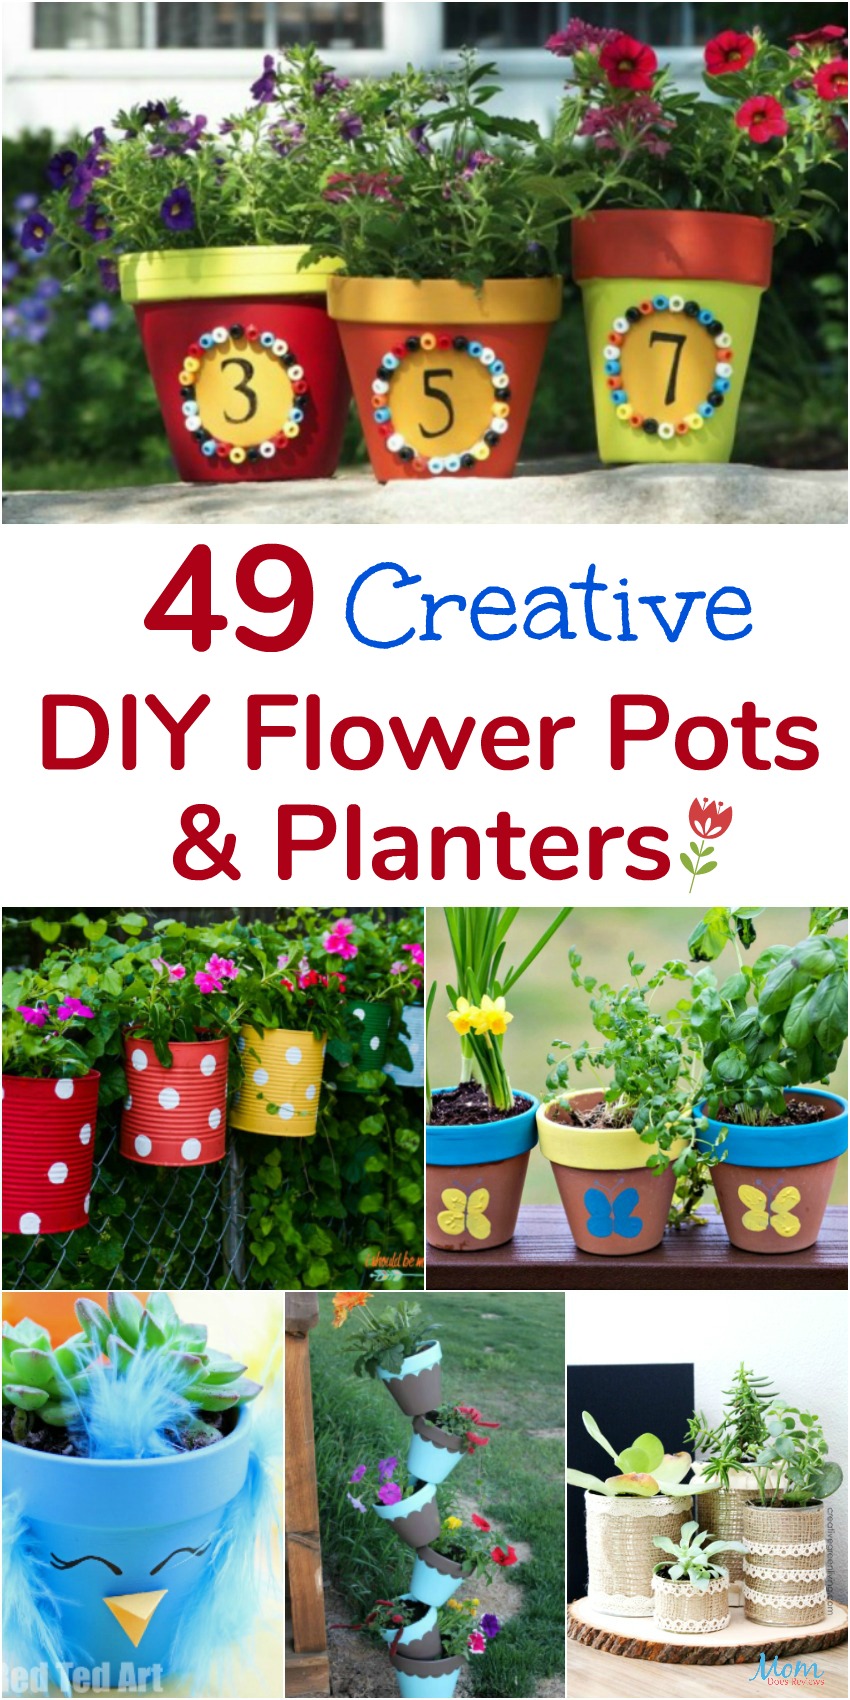 49 Creative DIY Flower Pots and Planters that are Fun and Unique